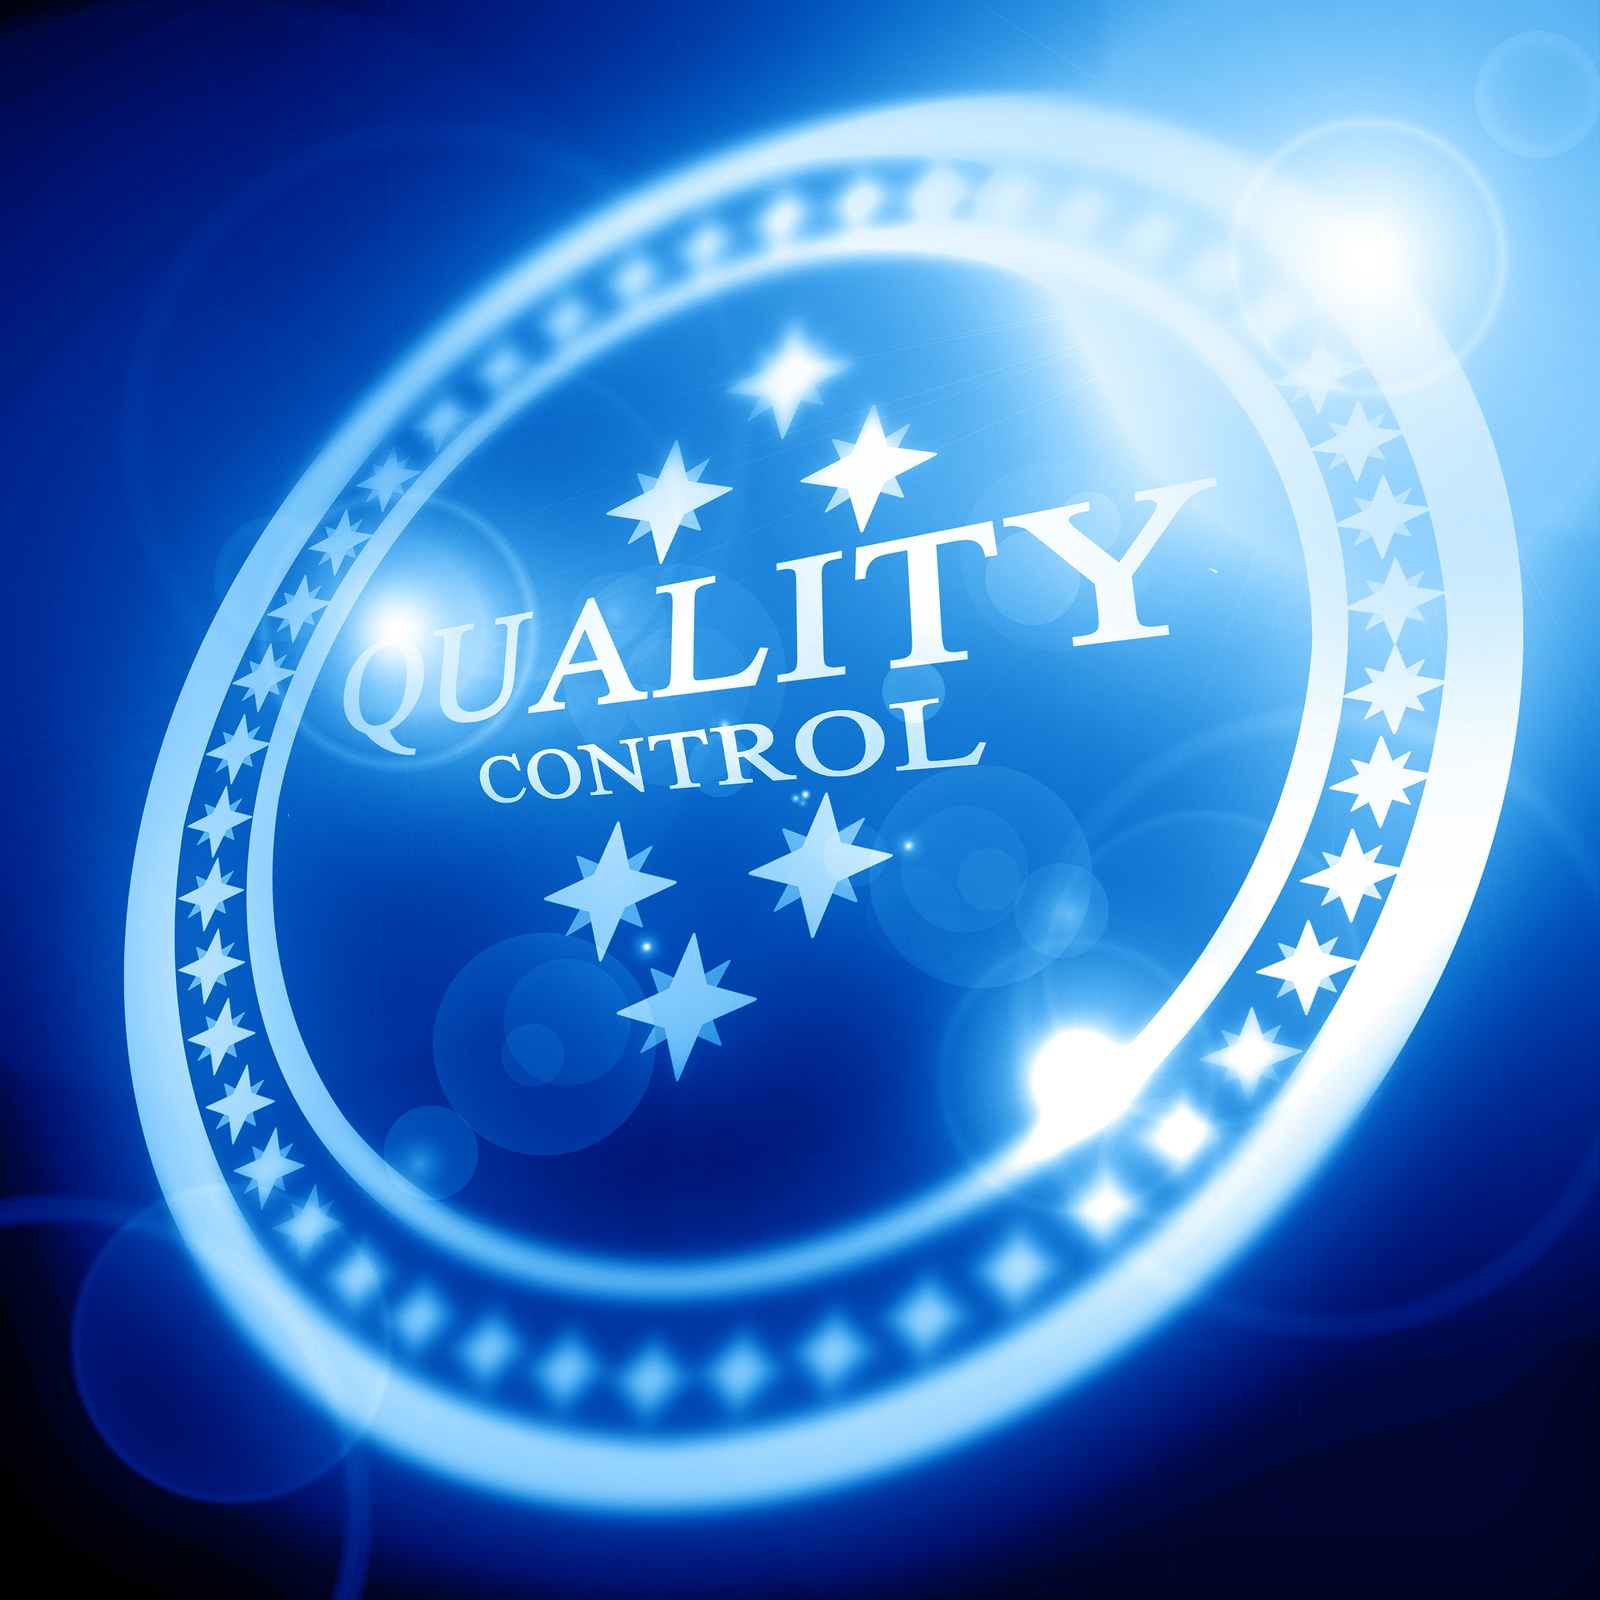 Quality Management Concept Stock Photo - Download Image Now - iStock